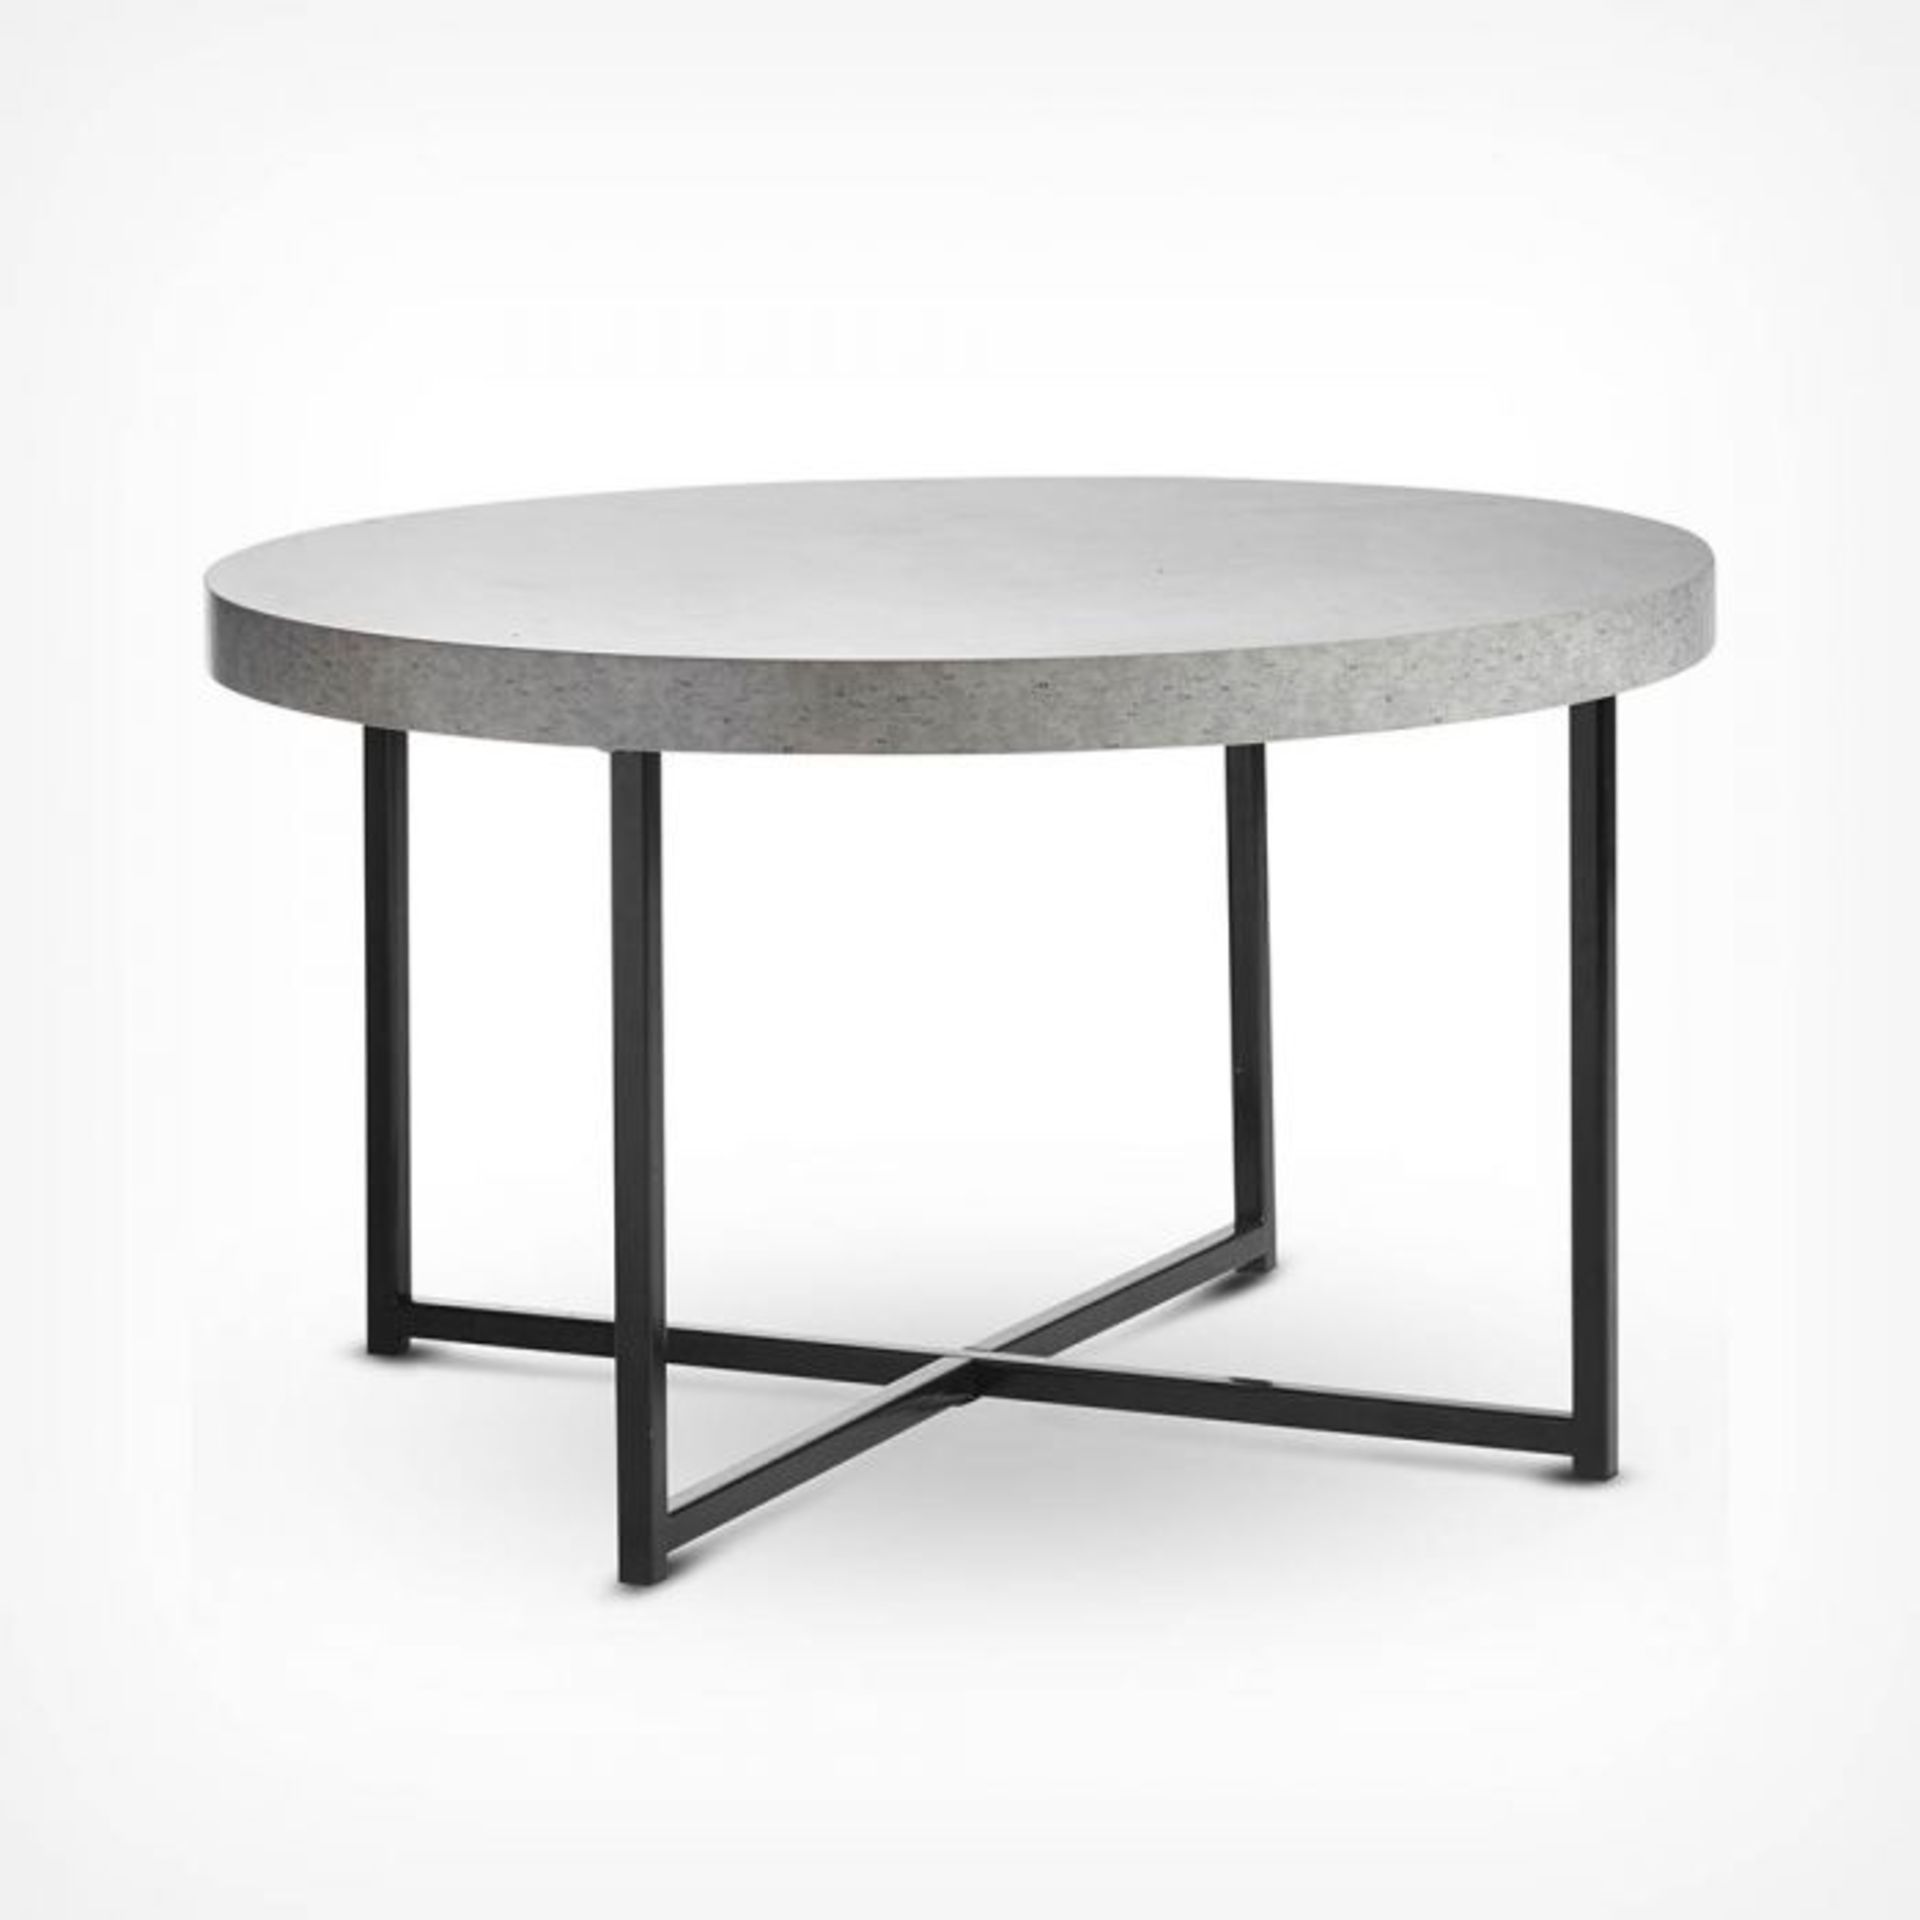 (S368) Concrete-Look Coffee Table Add a modern luxe feel to your living room with the VonHaus ... - Image 2 of 3